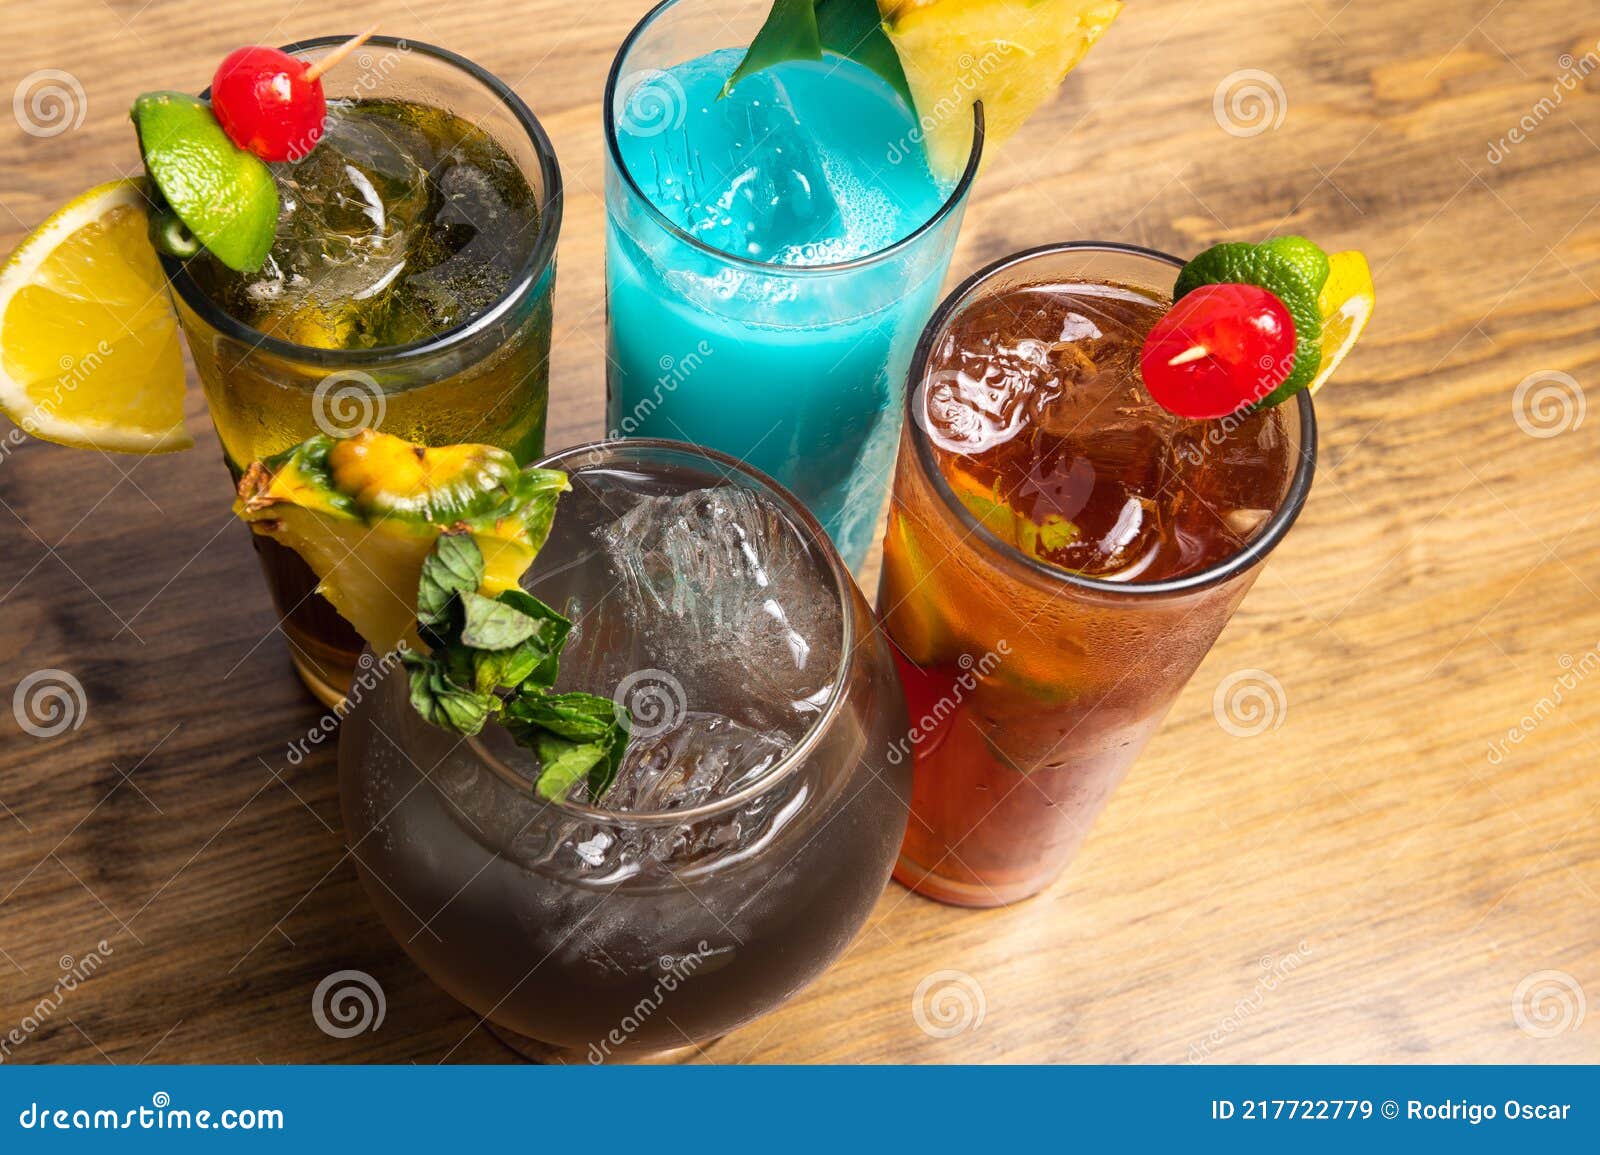 tropical cocktails on wooden background. frutal alcoholic cocktails. colorful drinks concept